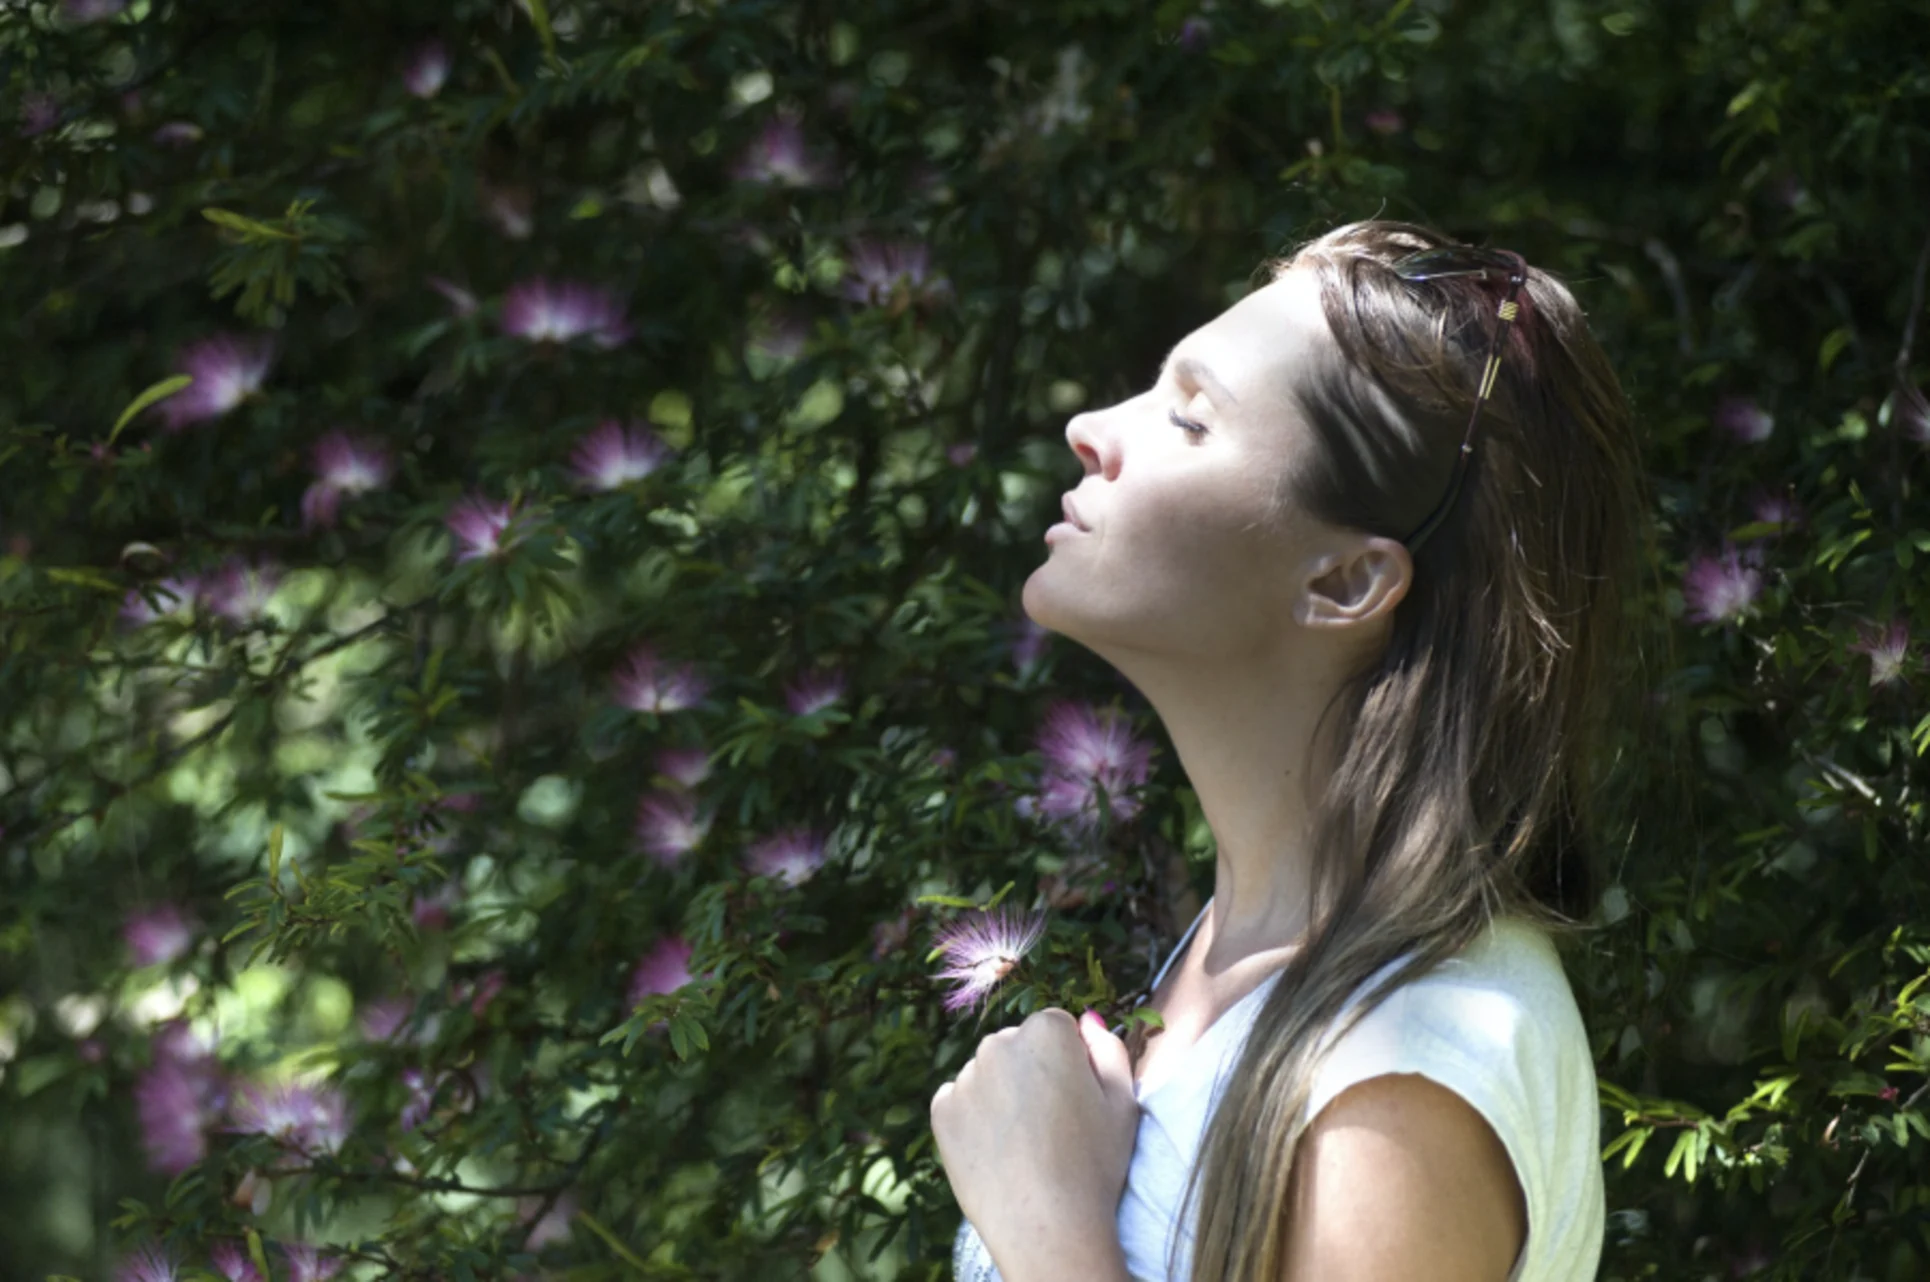 We know what causes the scent of spring, but what's it actually for?